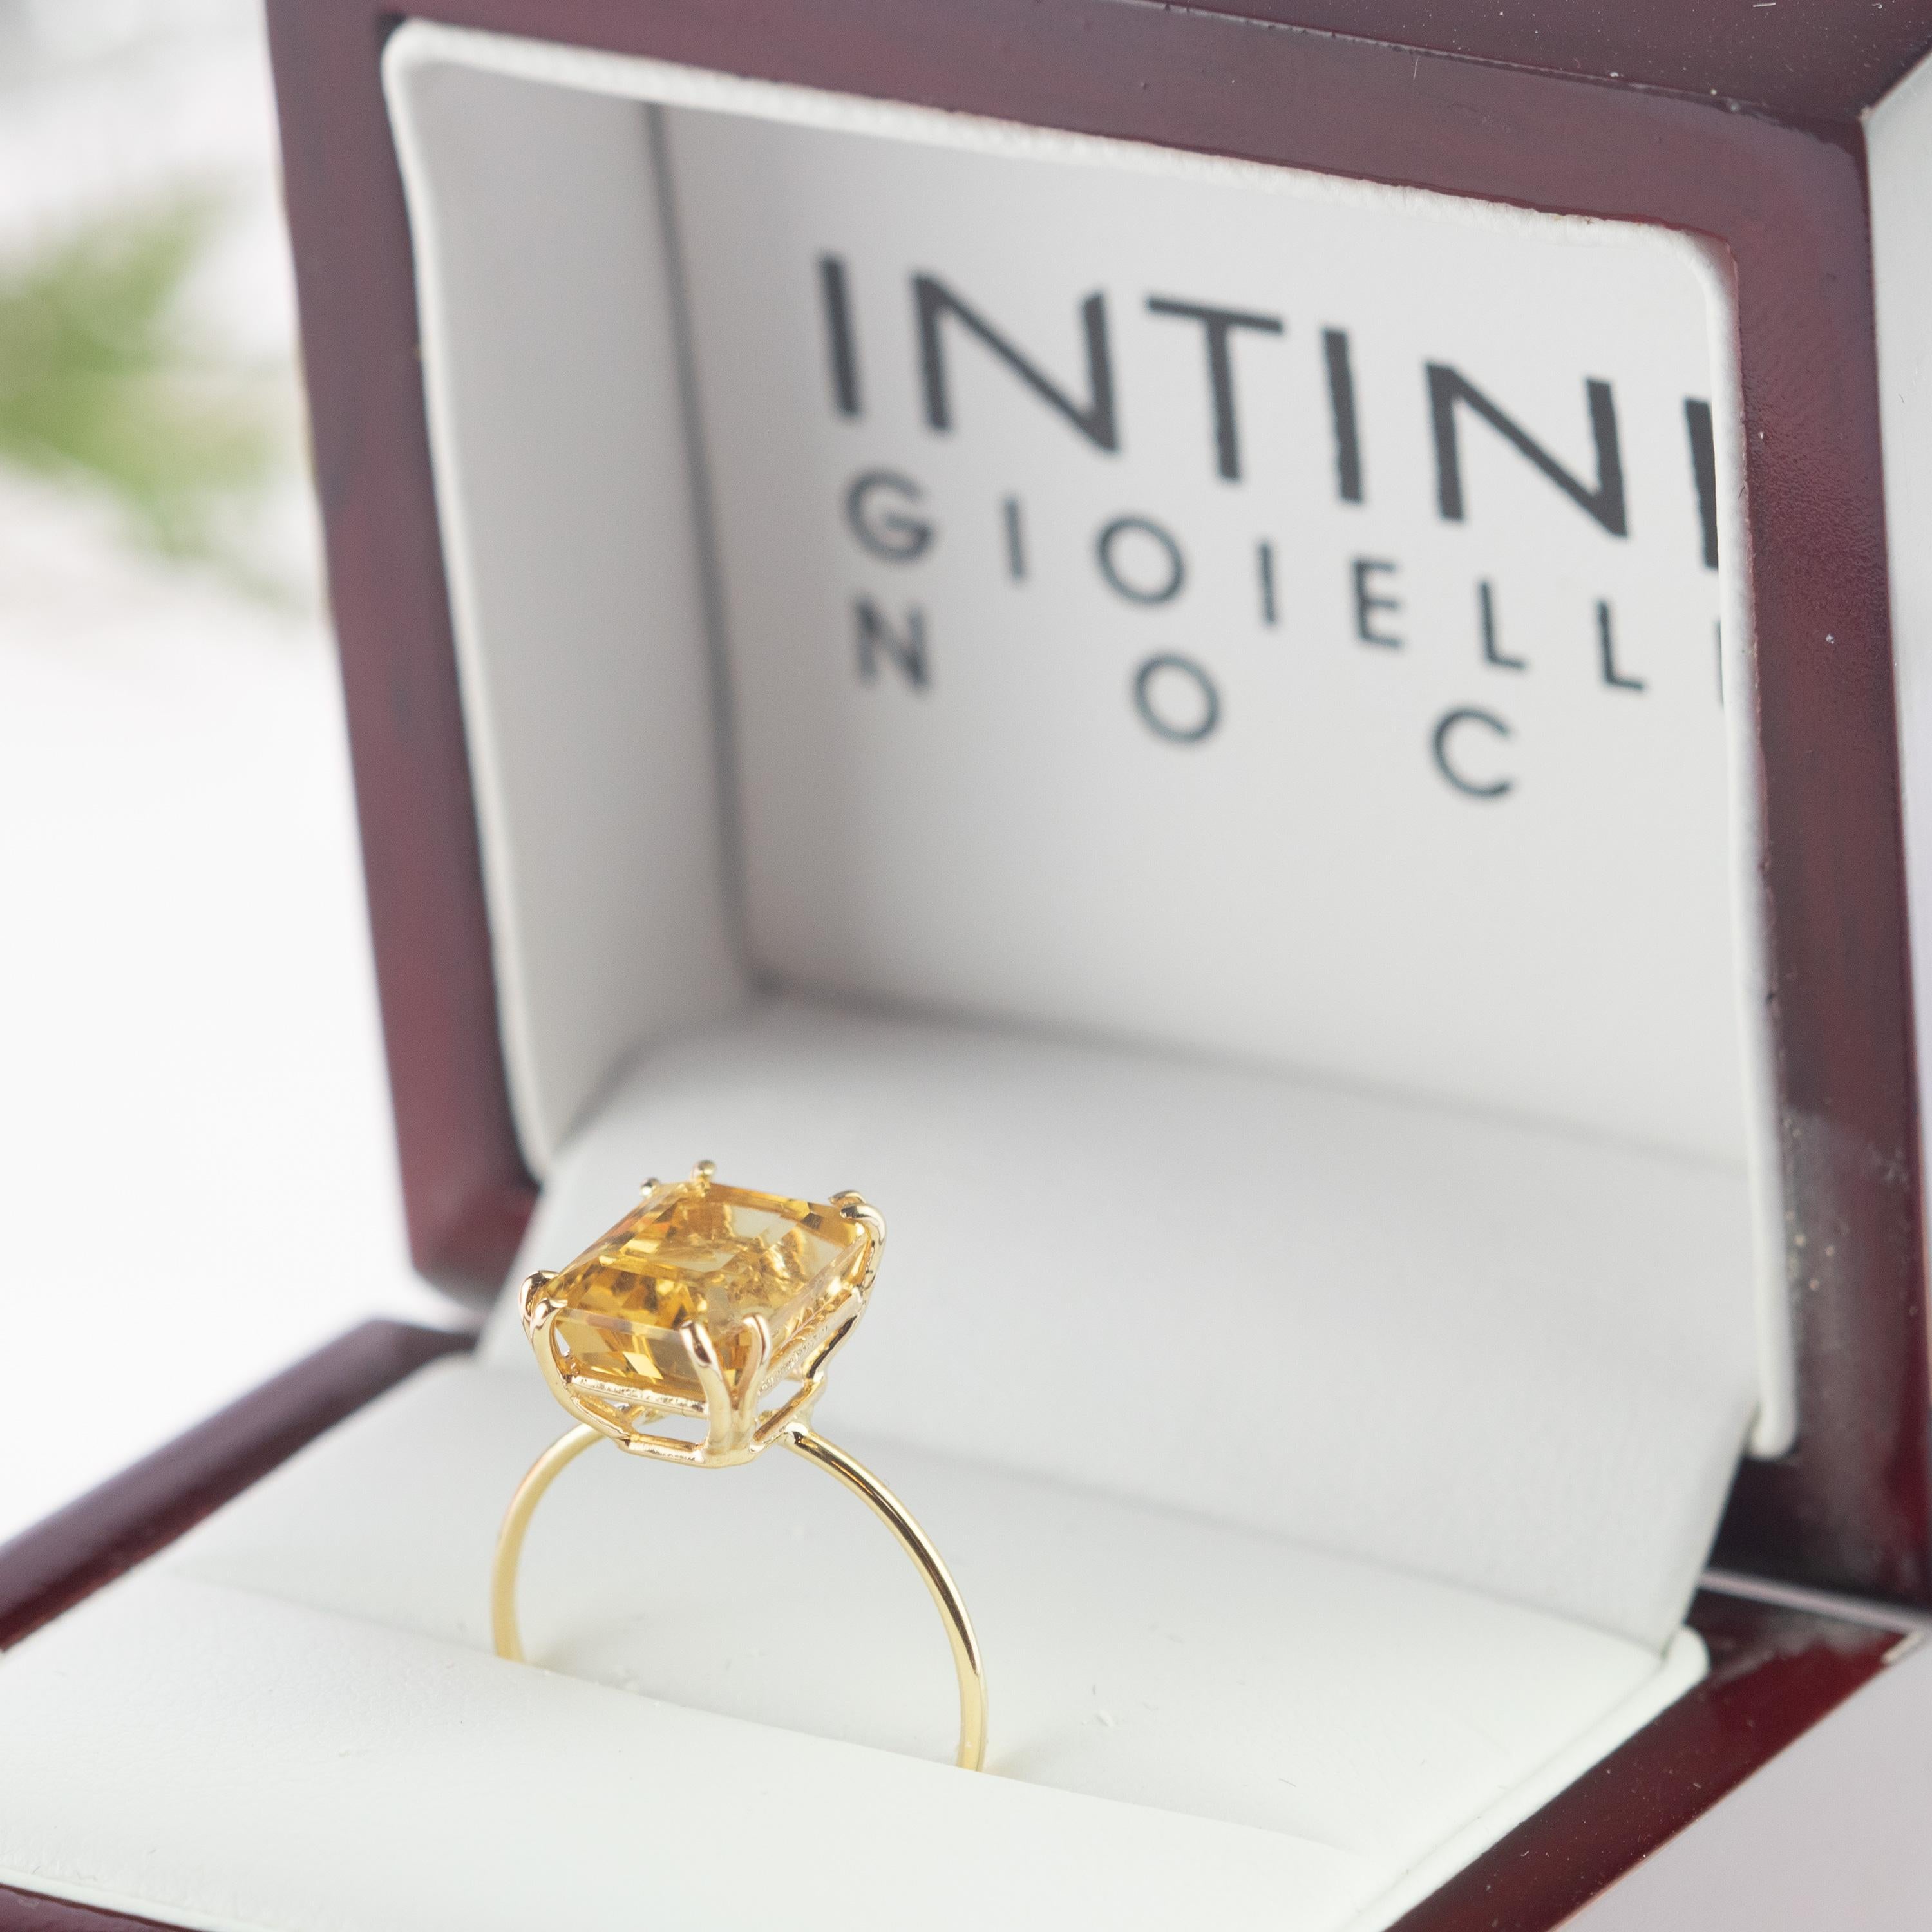 This extraordinary citrine quartz (6 carats) ring. All artfully set and crafted in 18k yellow gold to create this stunning piece of jewelry. This artwork is for a fresh, young and modern woman.

Inspired by the sun, the quartz resembles the fire